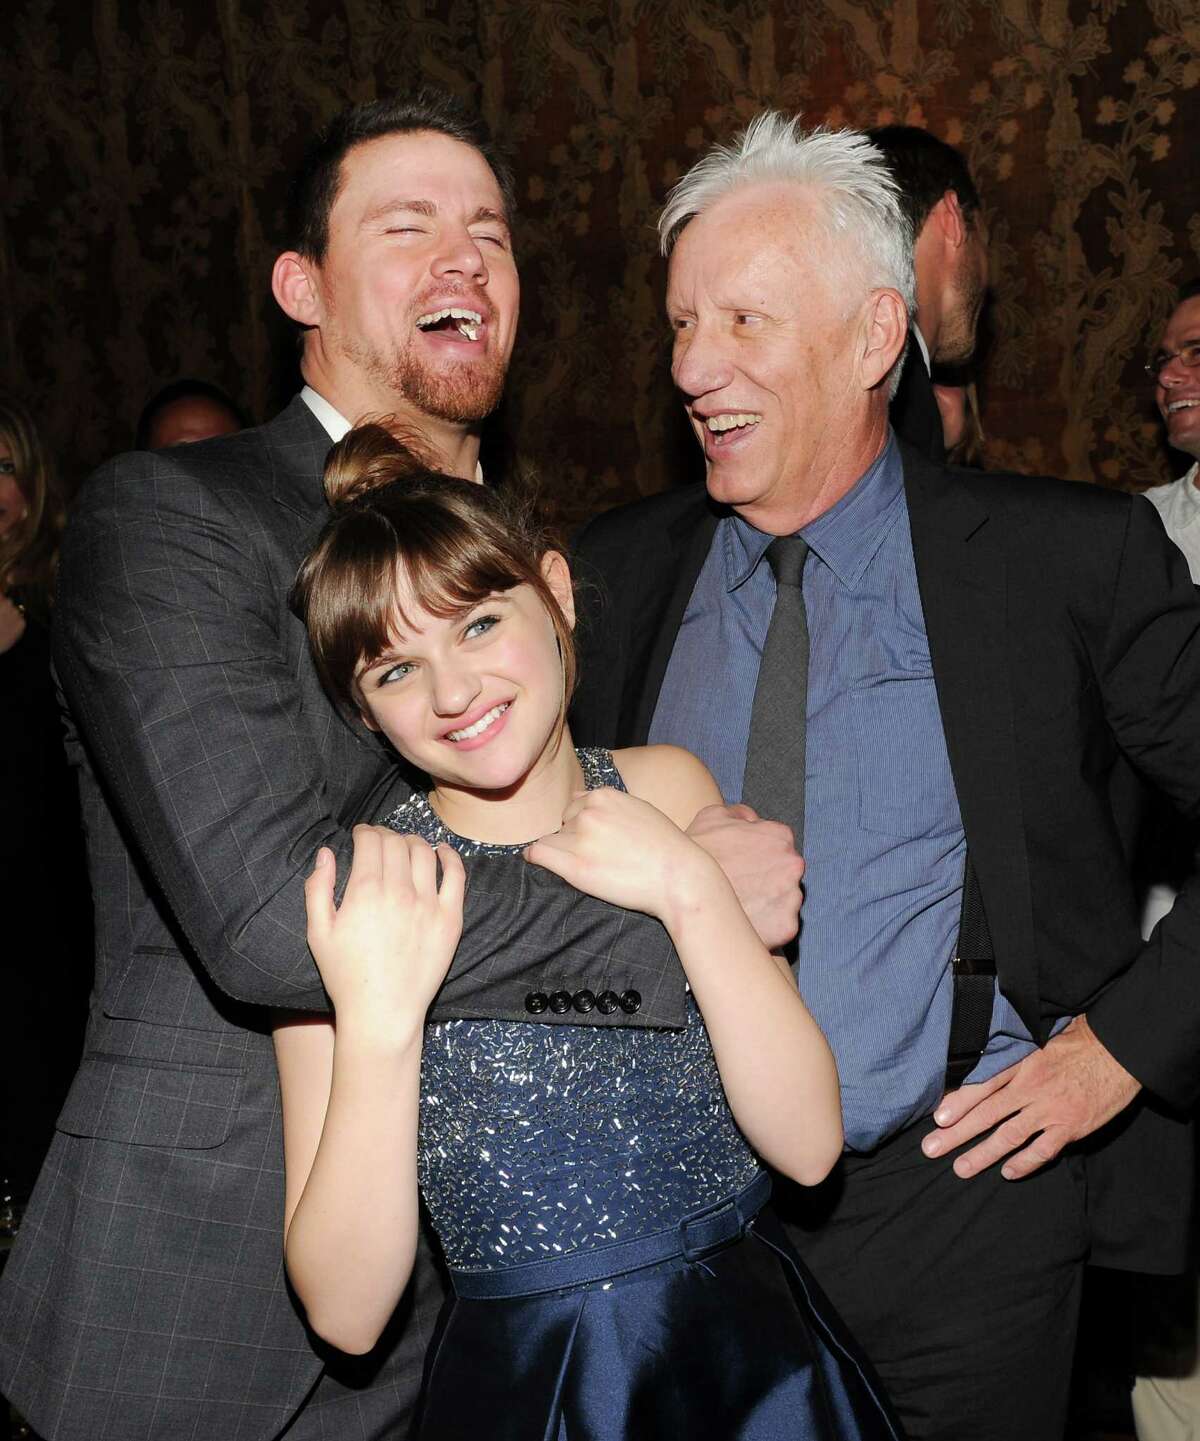 Actors Channing Tatum, left, Joey King and James Woods attend the "White House Down" premiere party at The Frick Collection on Tuesday, June 25, 2013 in New York. (Photo by Evan Agostini/Invision/AP) ORG XMIT: NYEA211